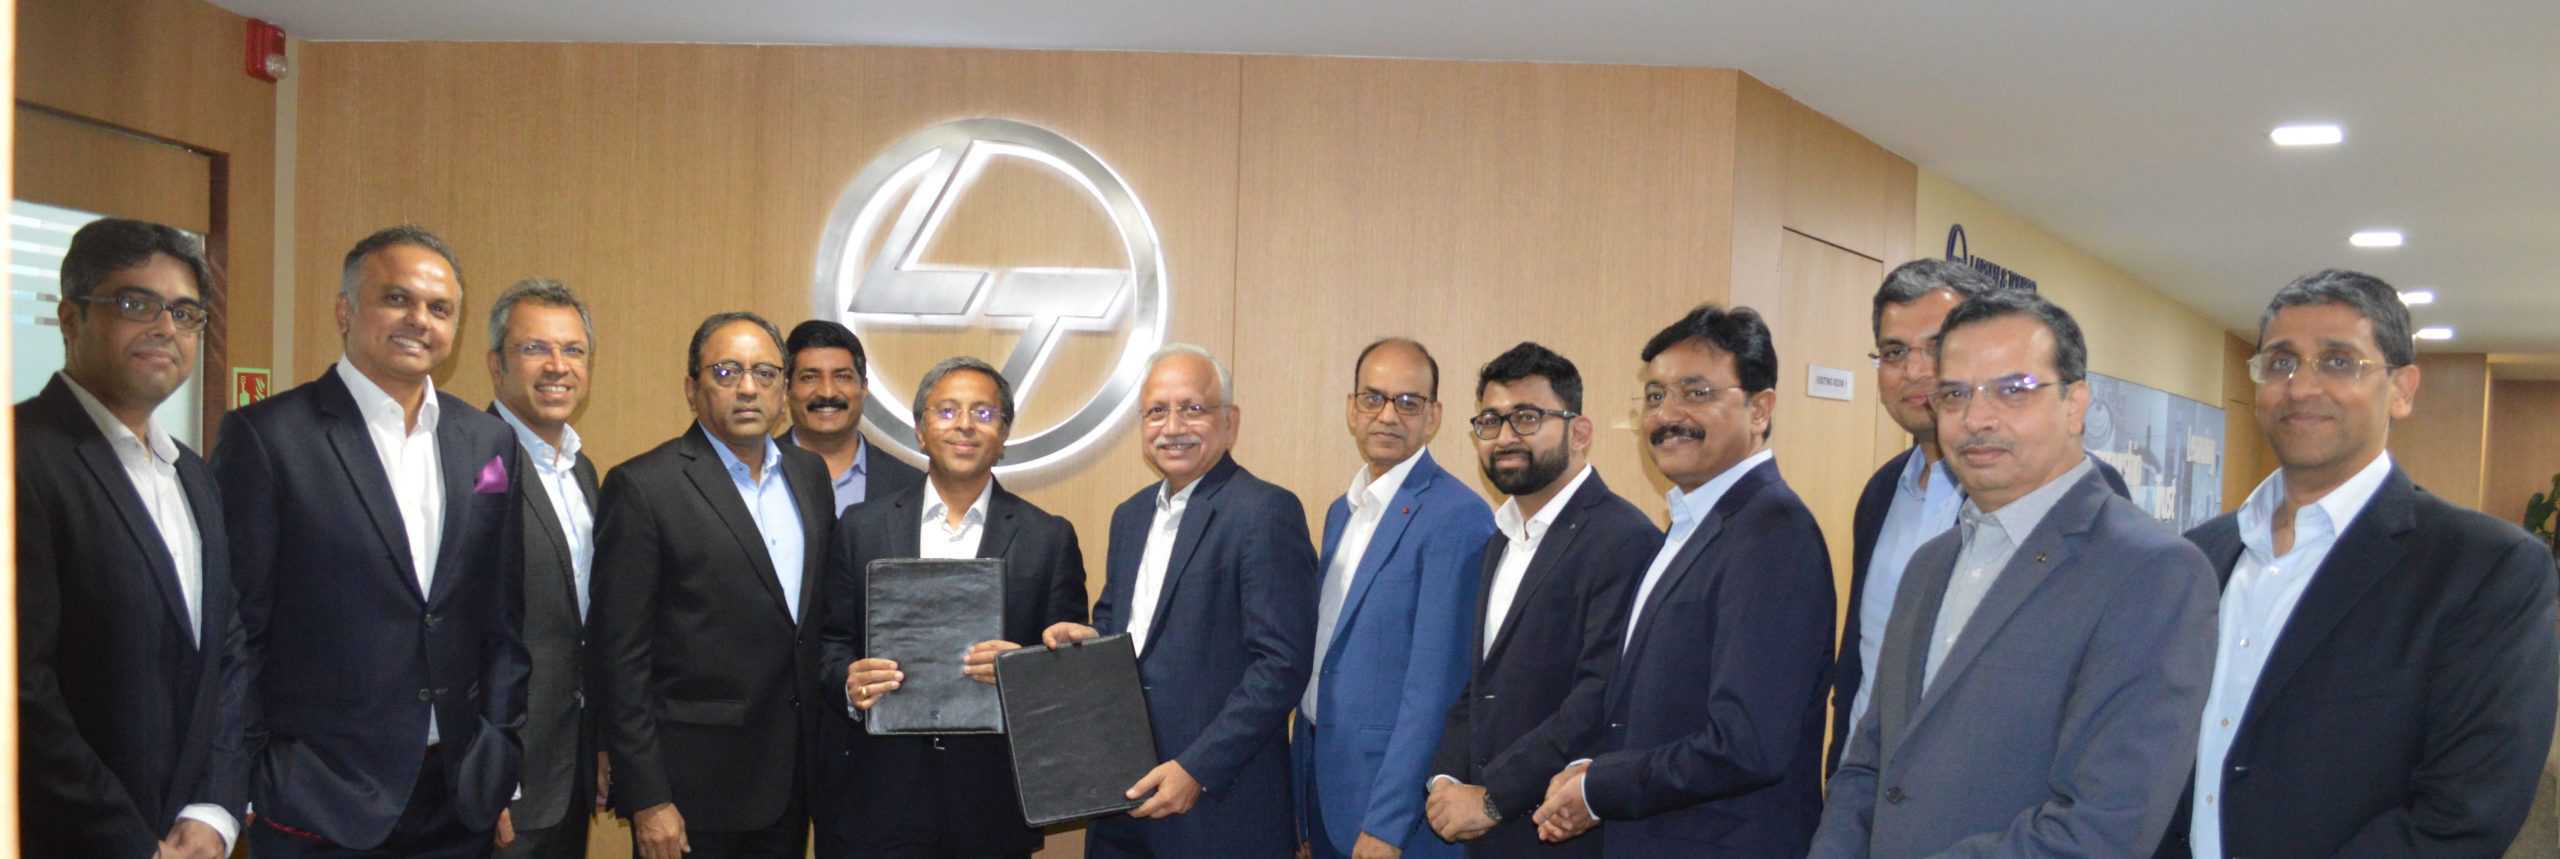 L&T Realty and CapitaLand India Trust to develop 6 million square feet (0.56 million square metres) of prime office spaces in India